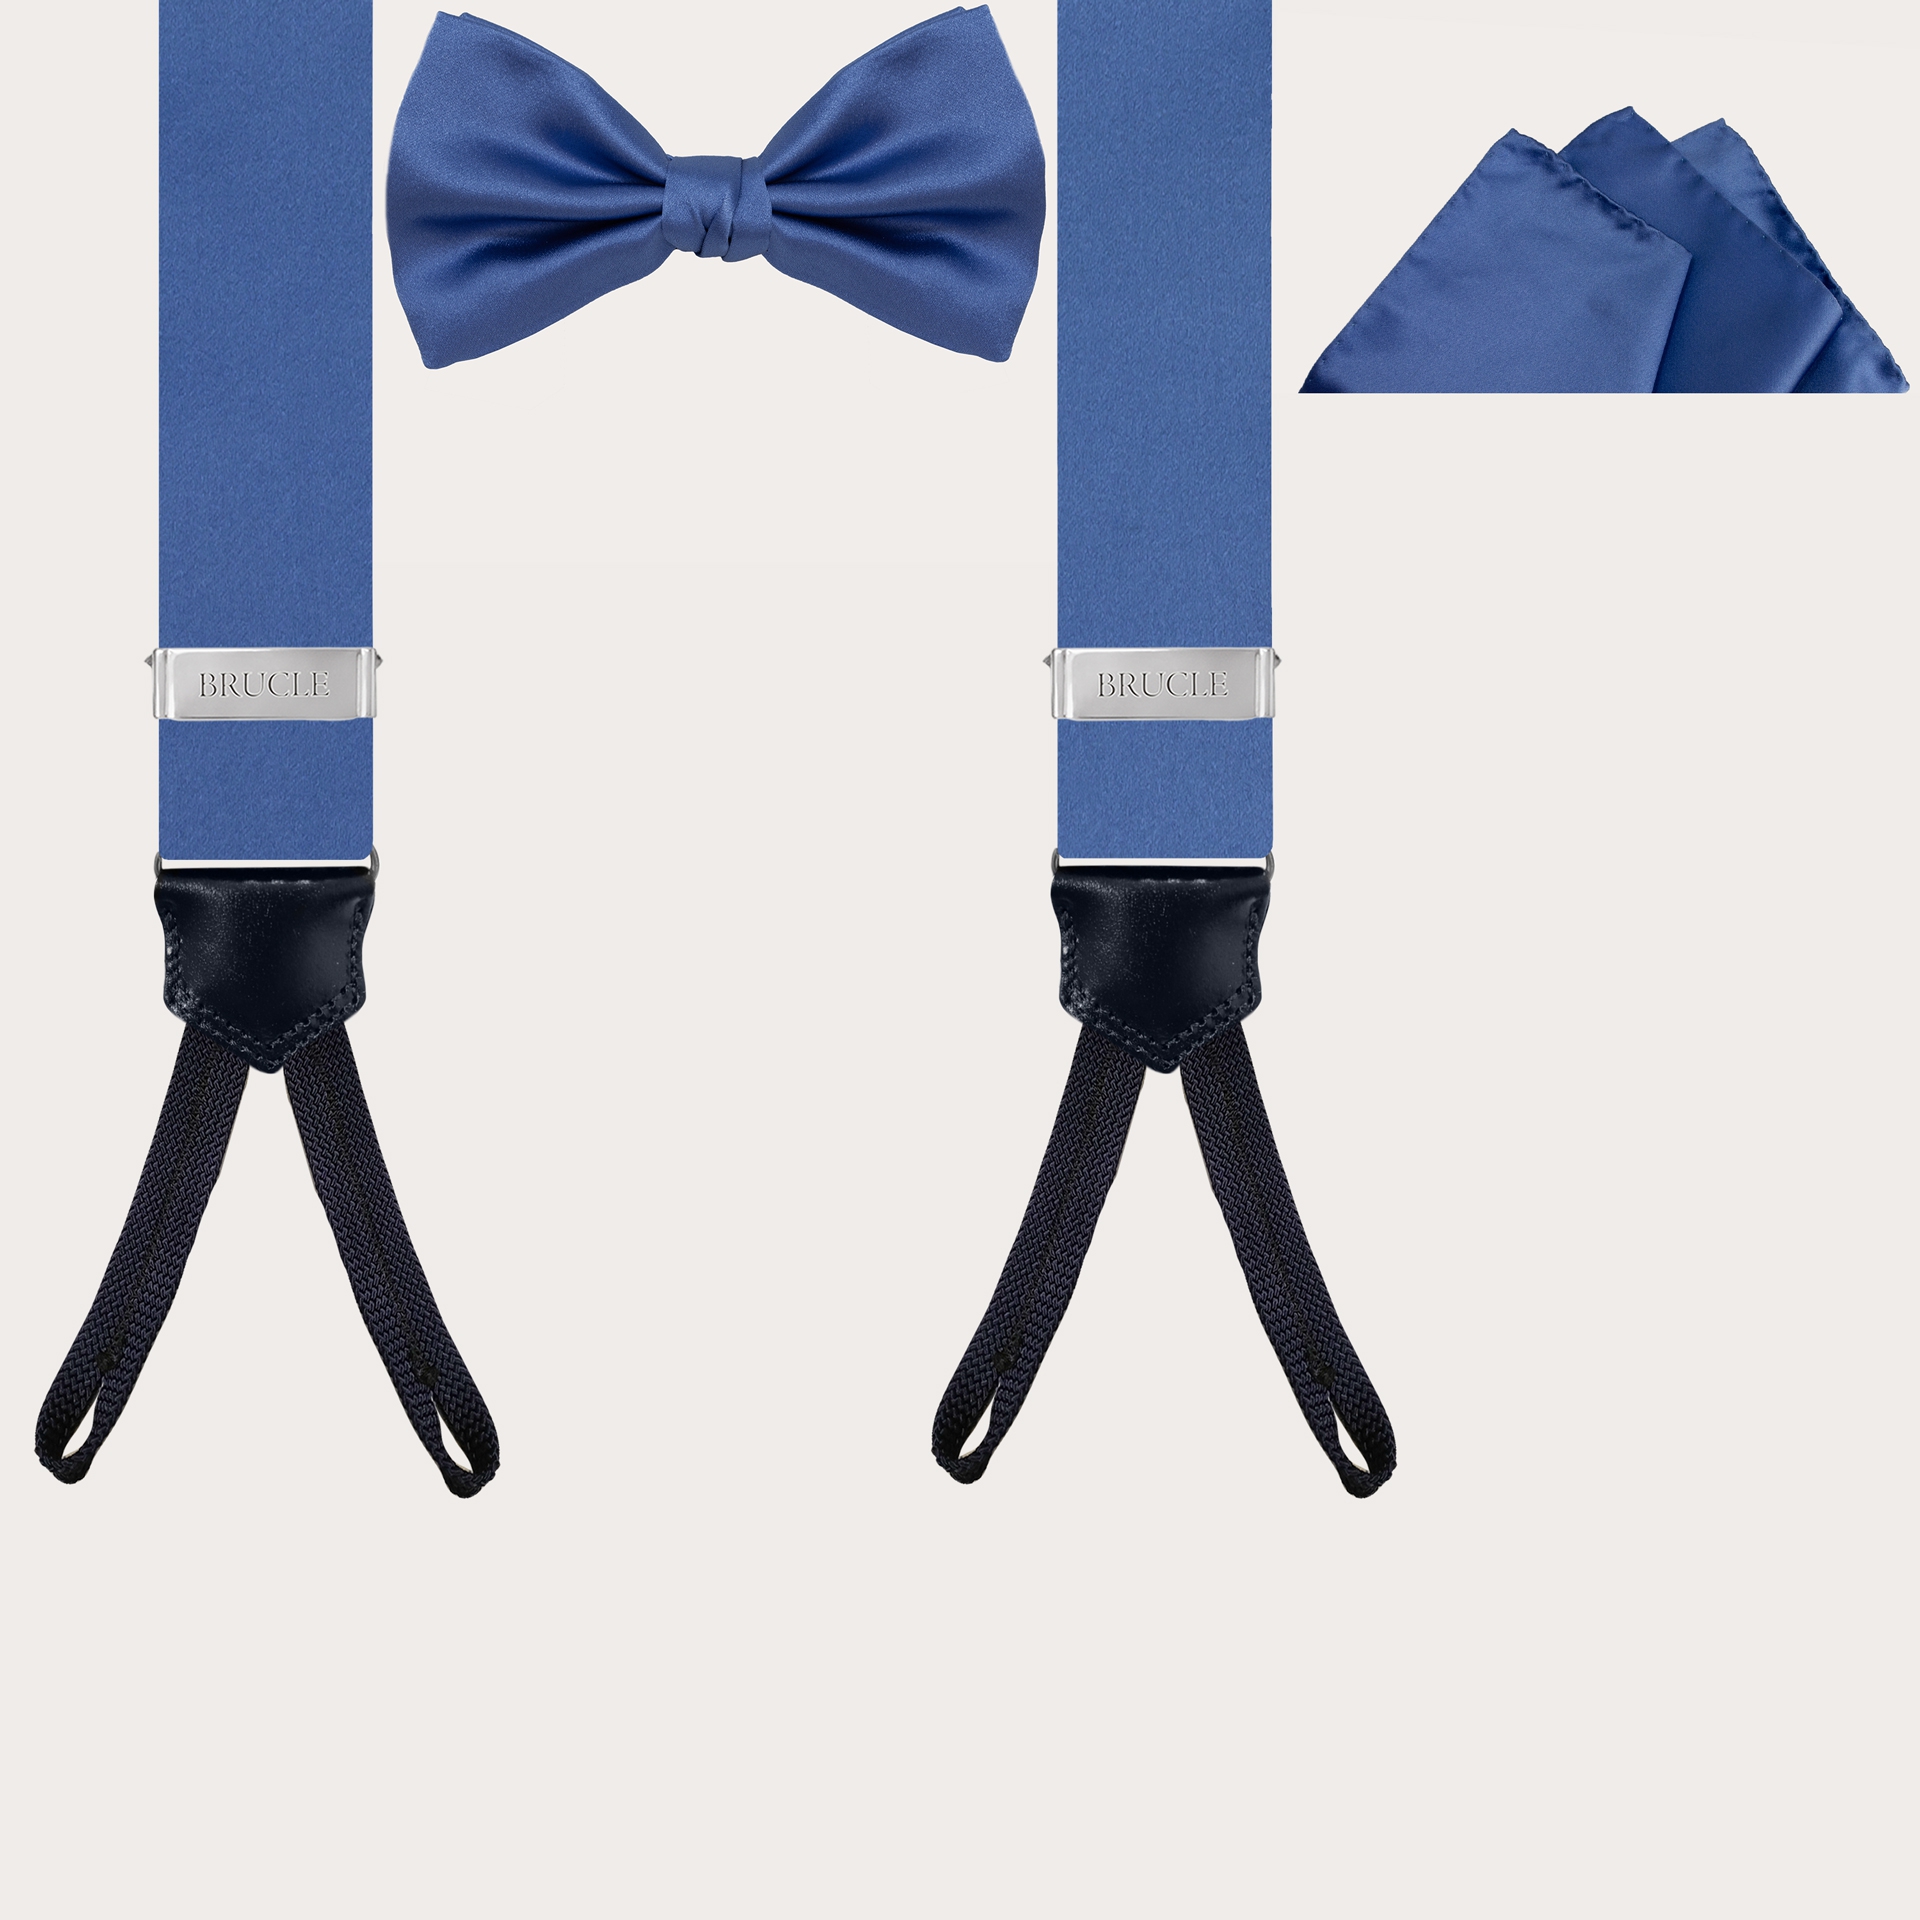 BRUCLE Elegant set of suspenders with buttonholes, bow tie and pocket square in light blue silk satin